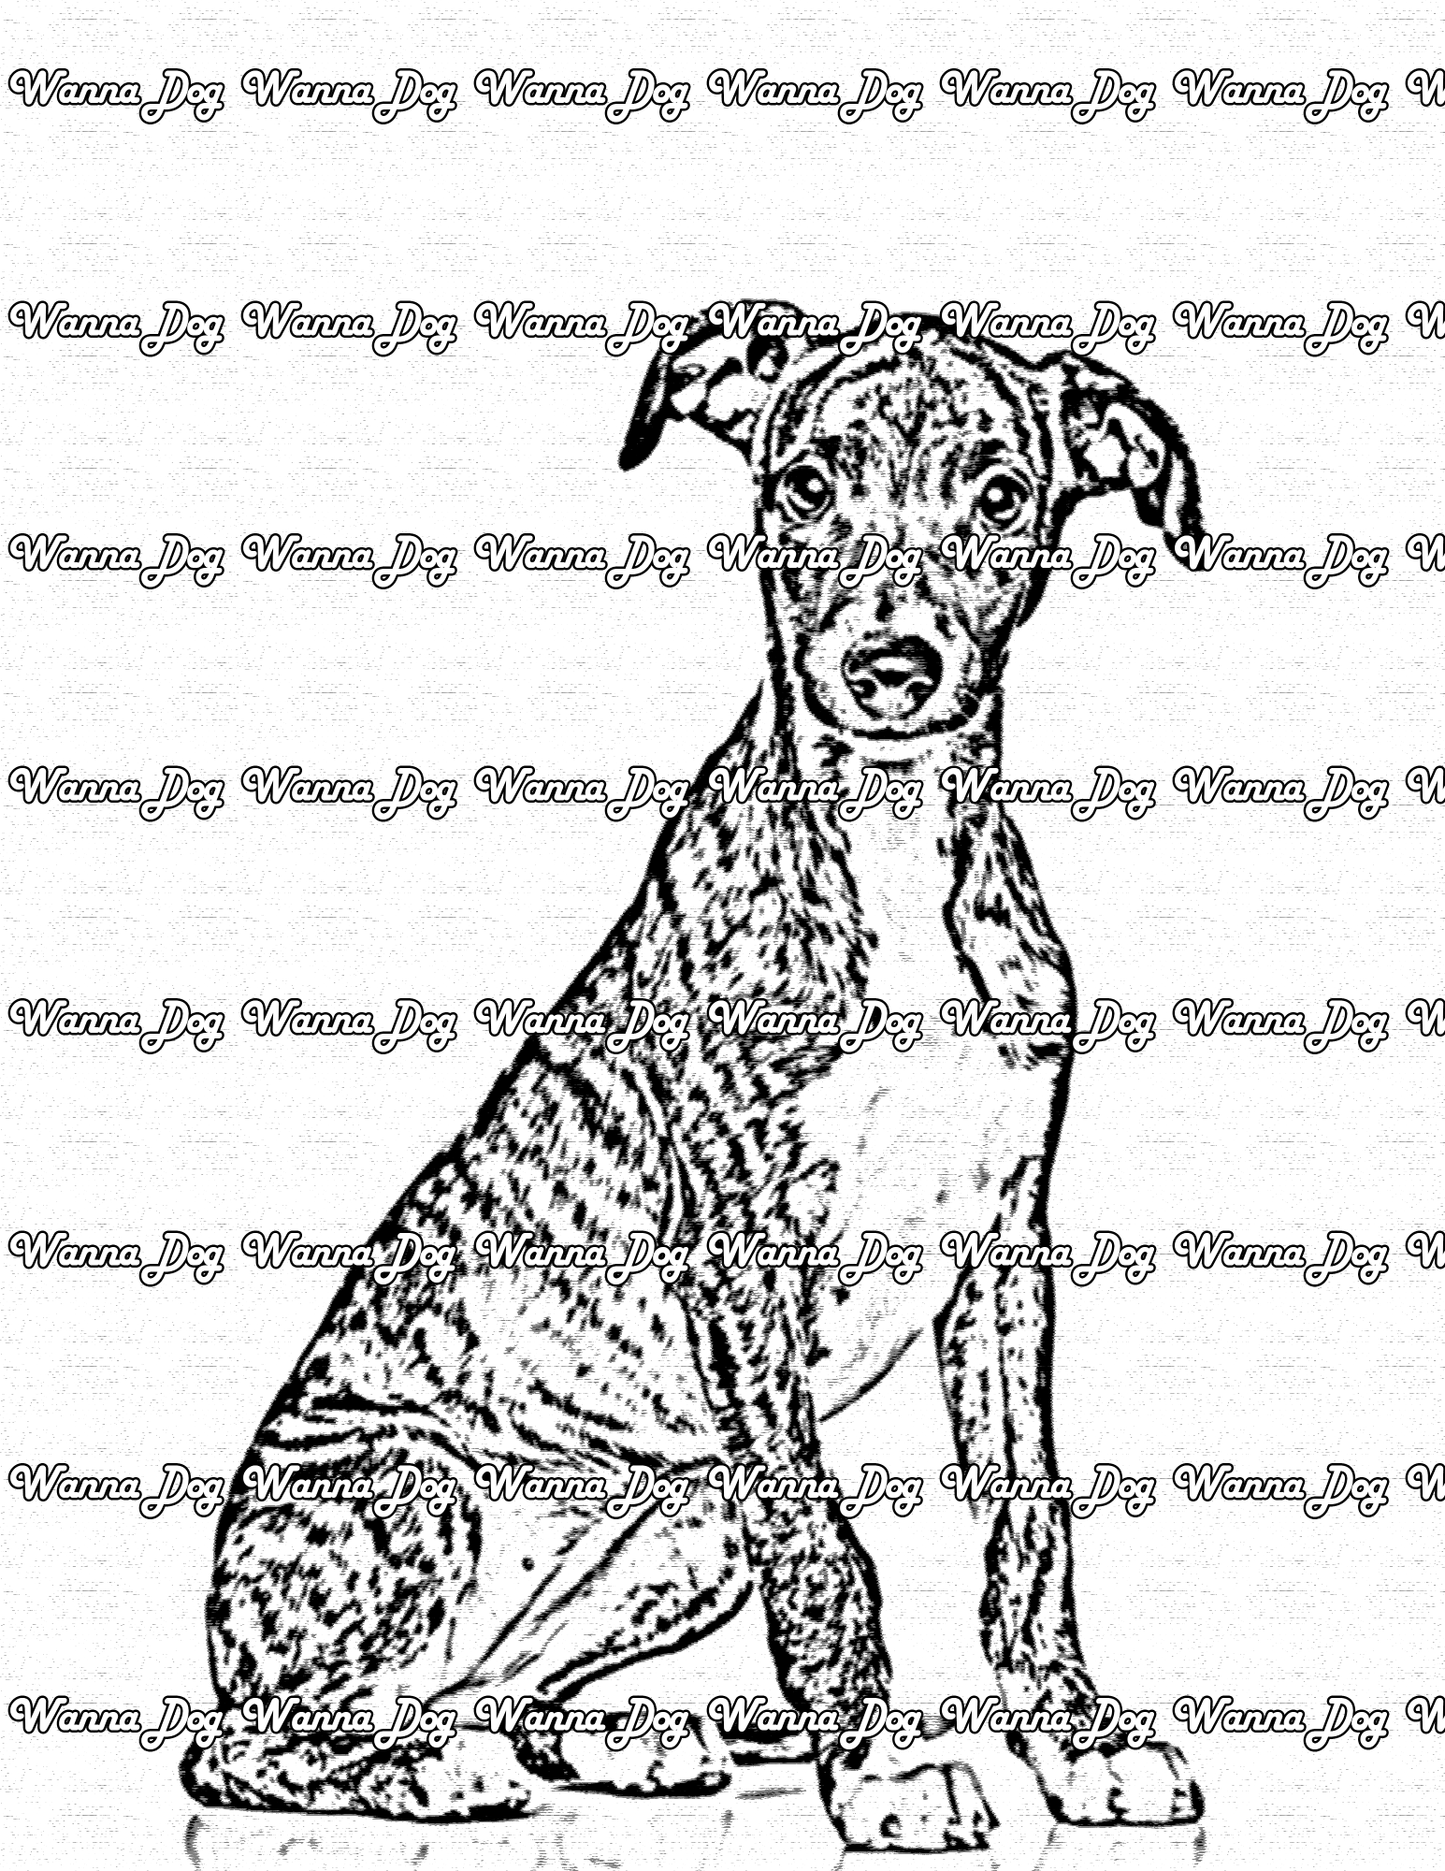 Whippet Coloring Page of a Whippet sitting and posing